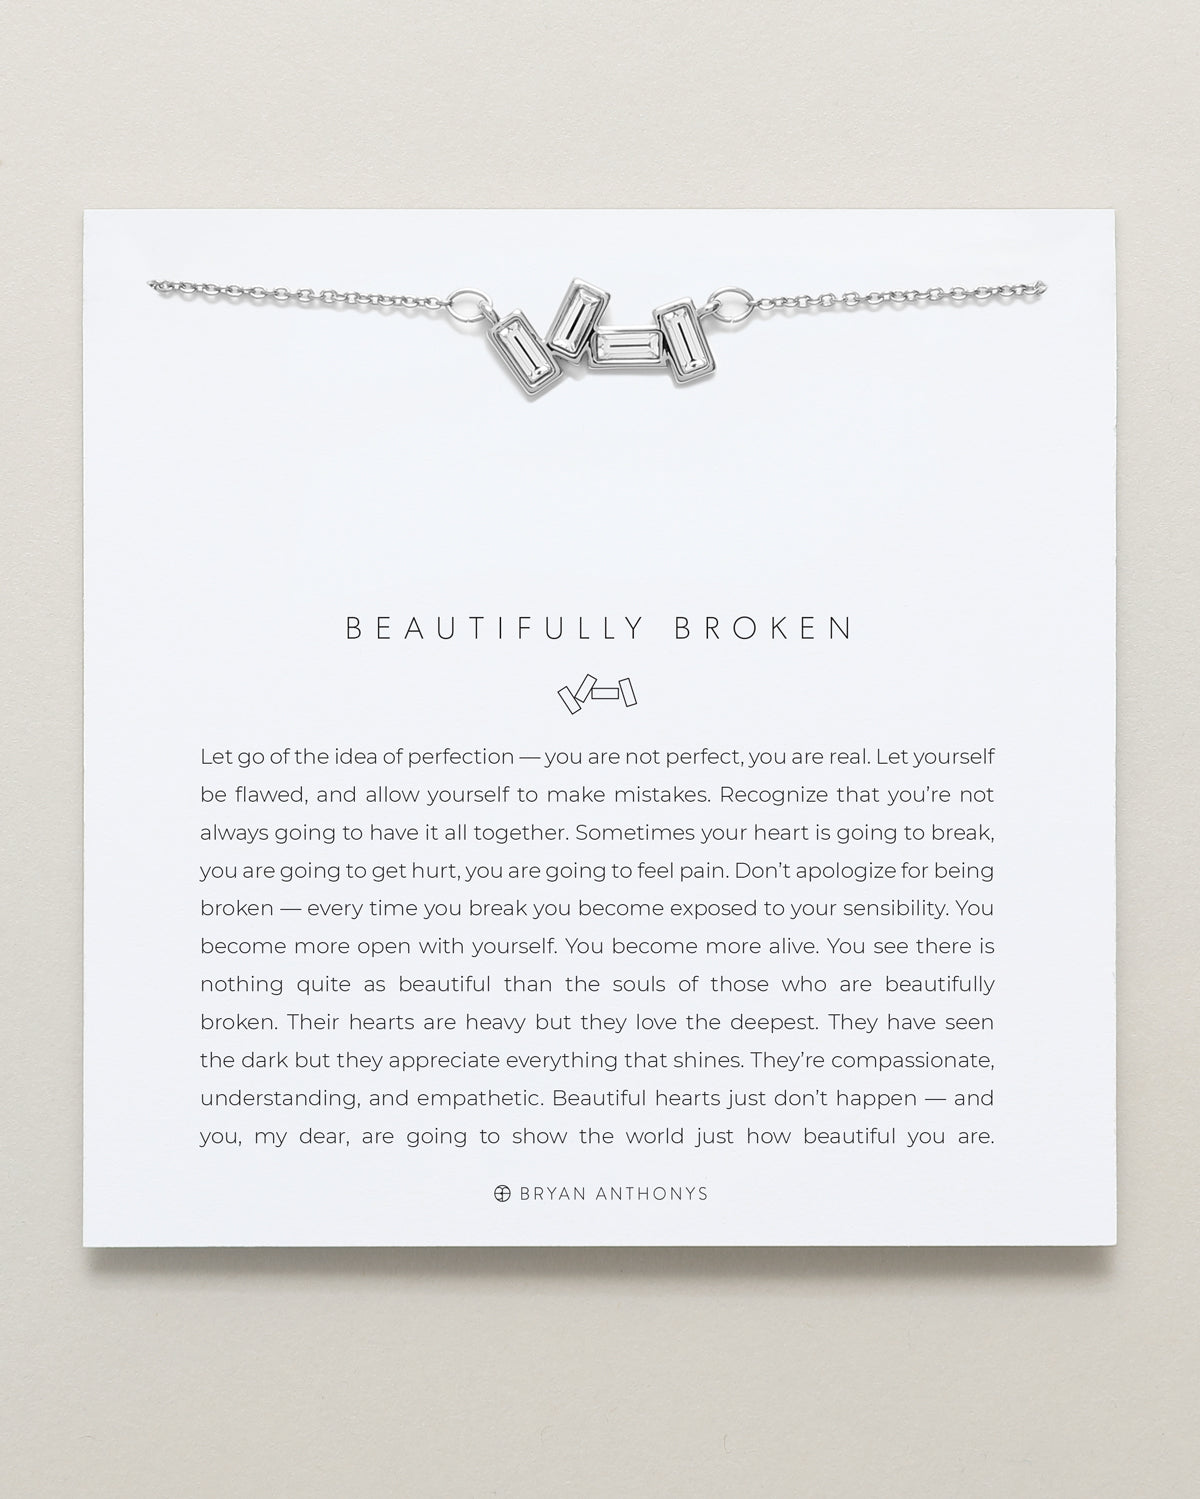 bryan anthonys beautifully broken dainty necklace silver